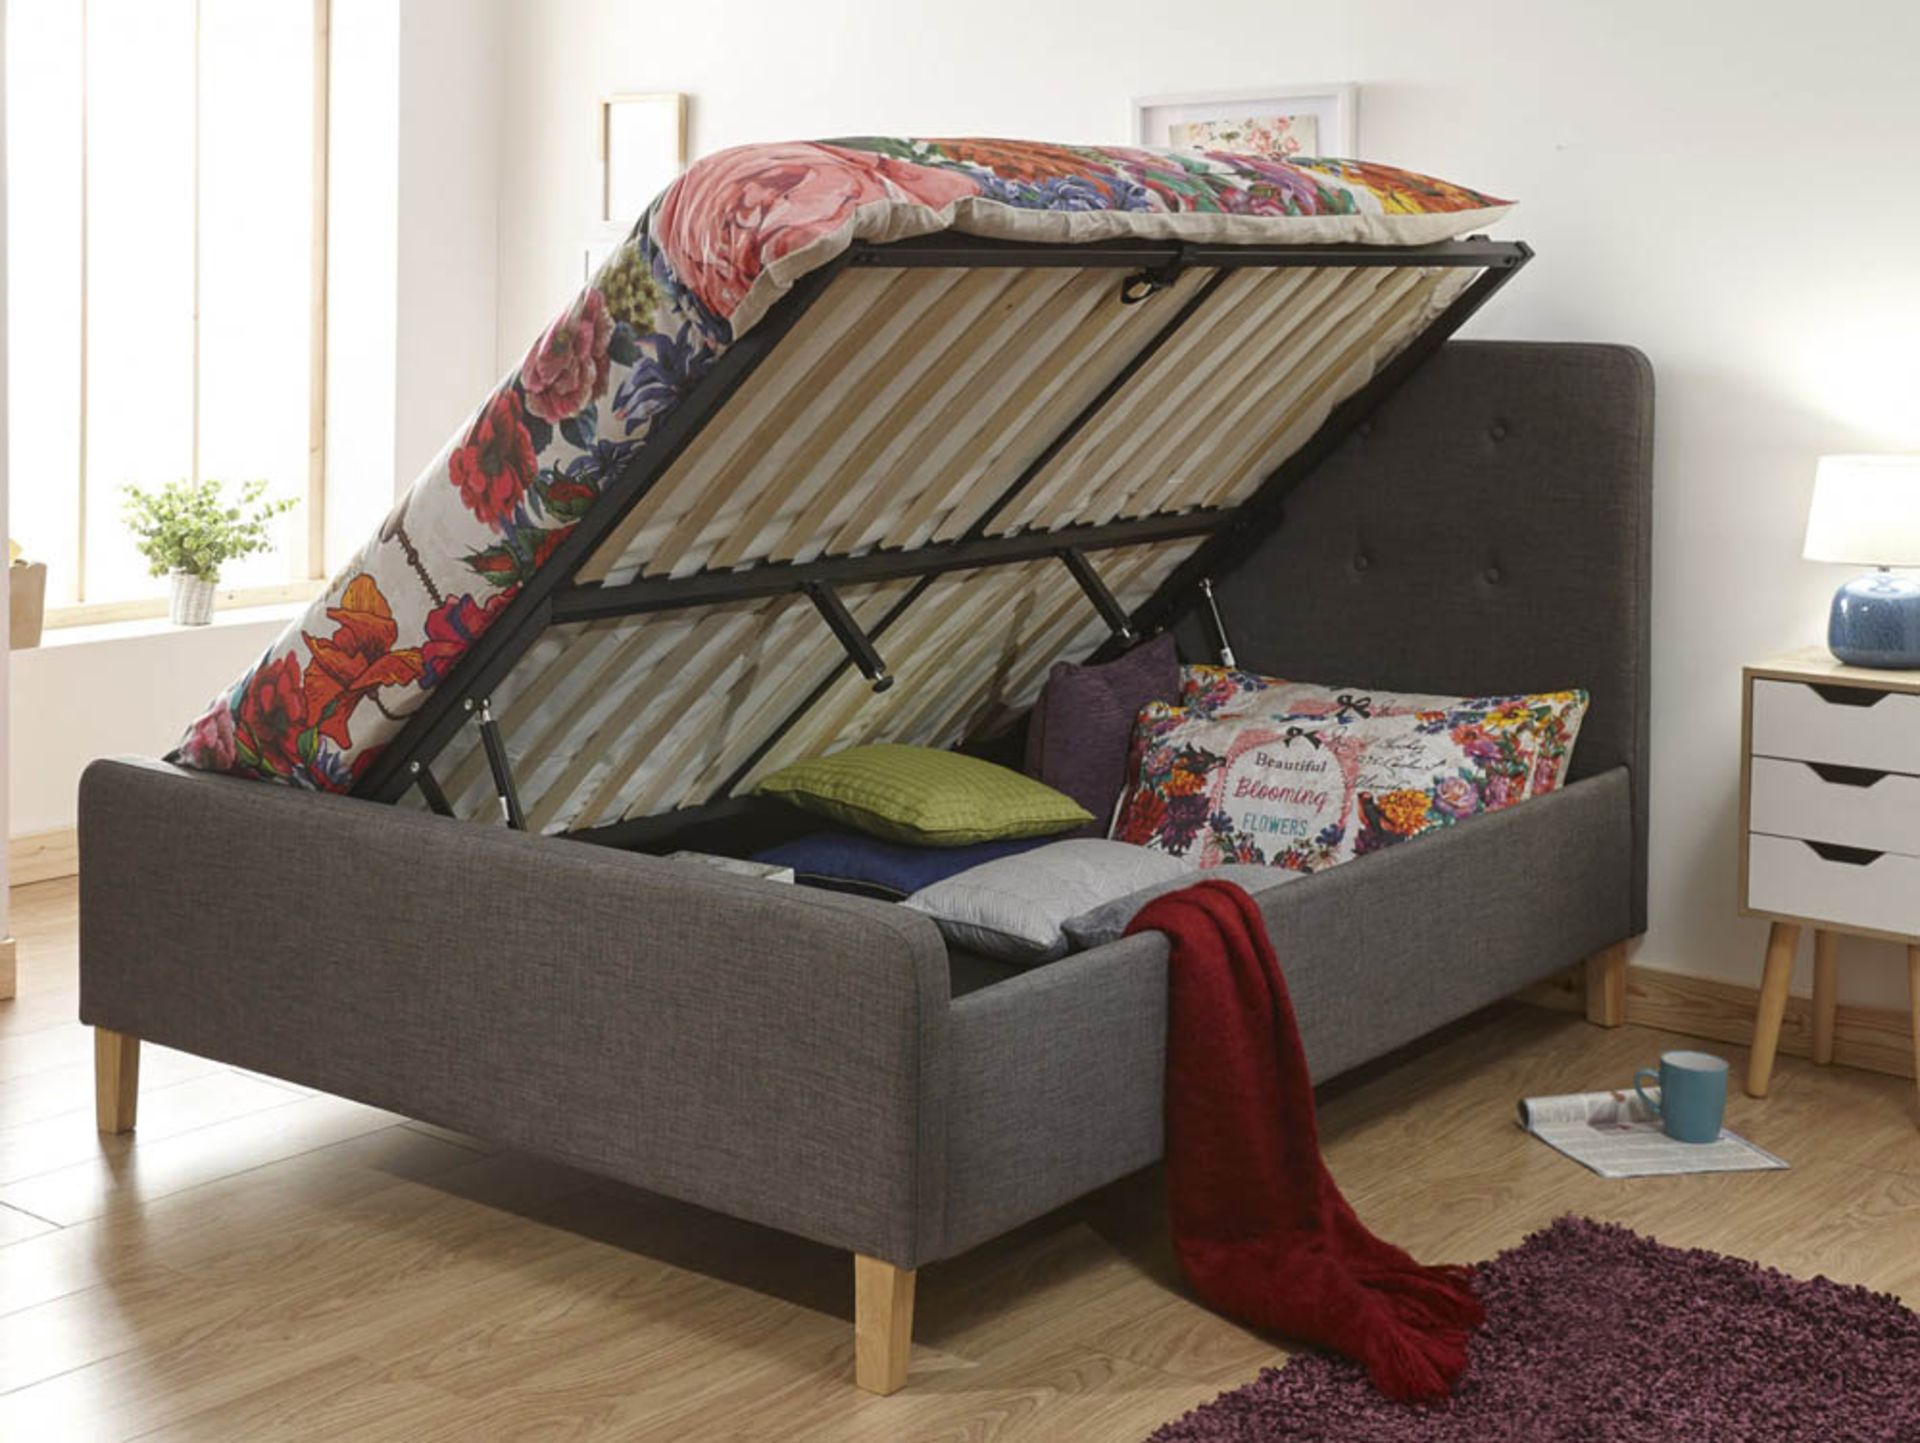 GFW Ashbourne 4ft6 Double Dark Grey Fabric Ottoman Bed Frame. RRP £450.00. - SR4. A lovely and - Image 2 of 2